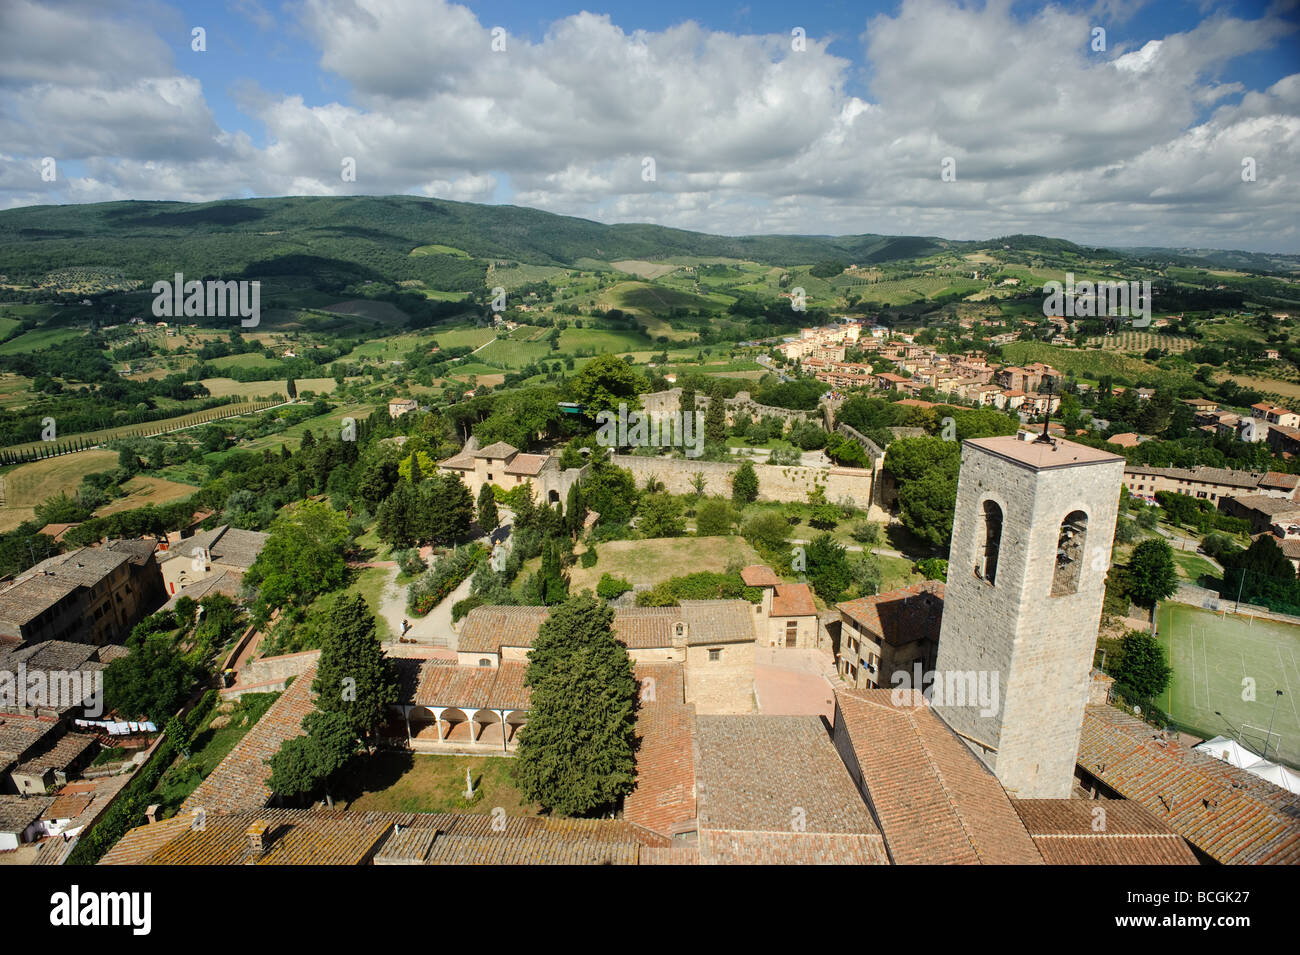 West View With La Rocca Di Montestaffoli Fortress From Tower Torre Grossa San Gimignano Tuscany